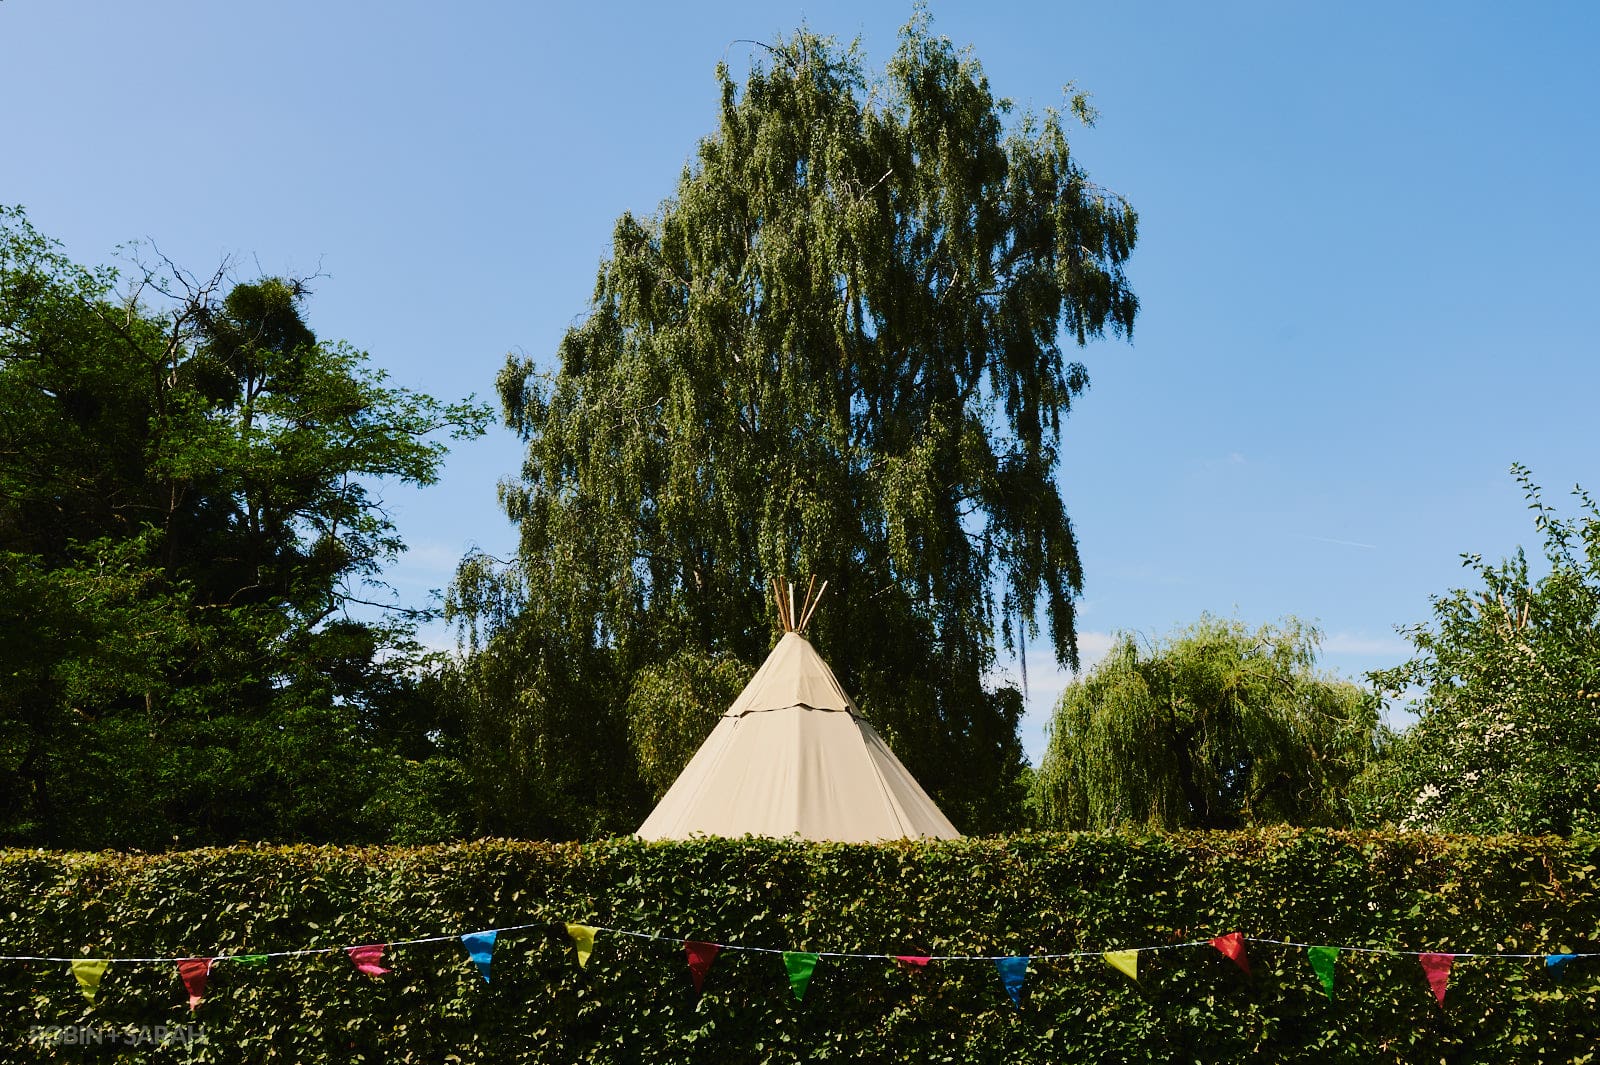 Top of wedding tipi at Oakfield Gardens, with bunting along hedgerow